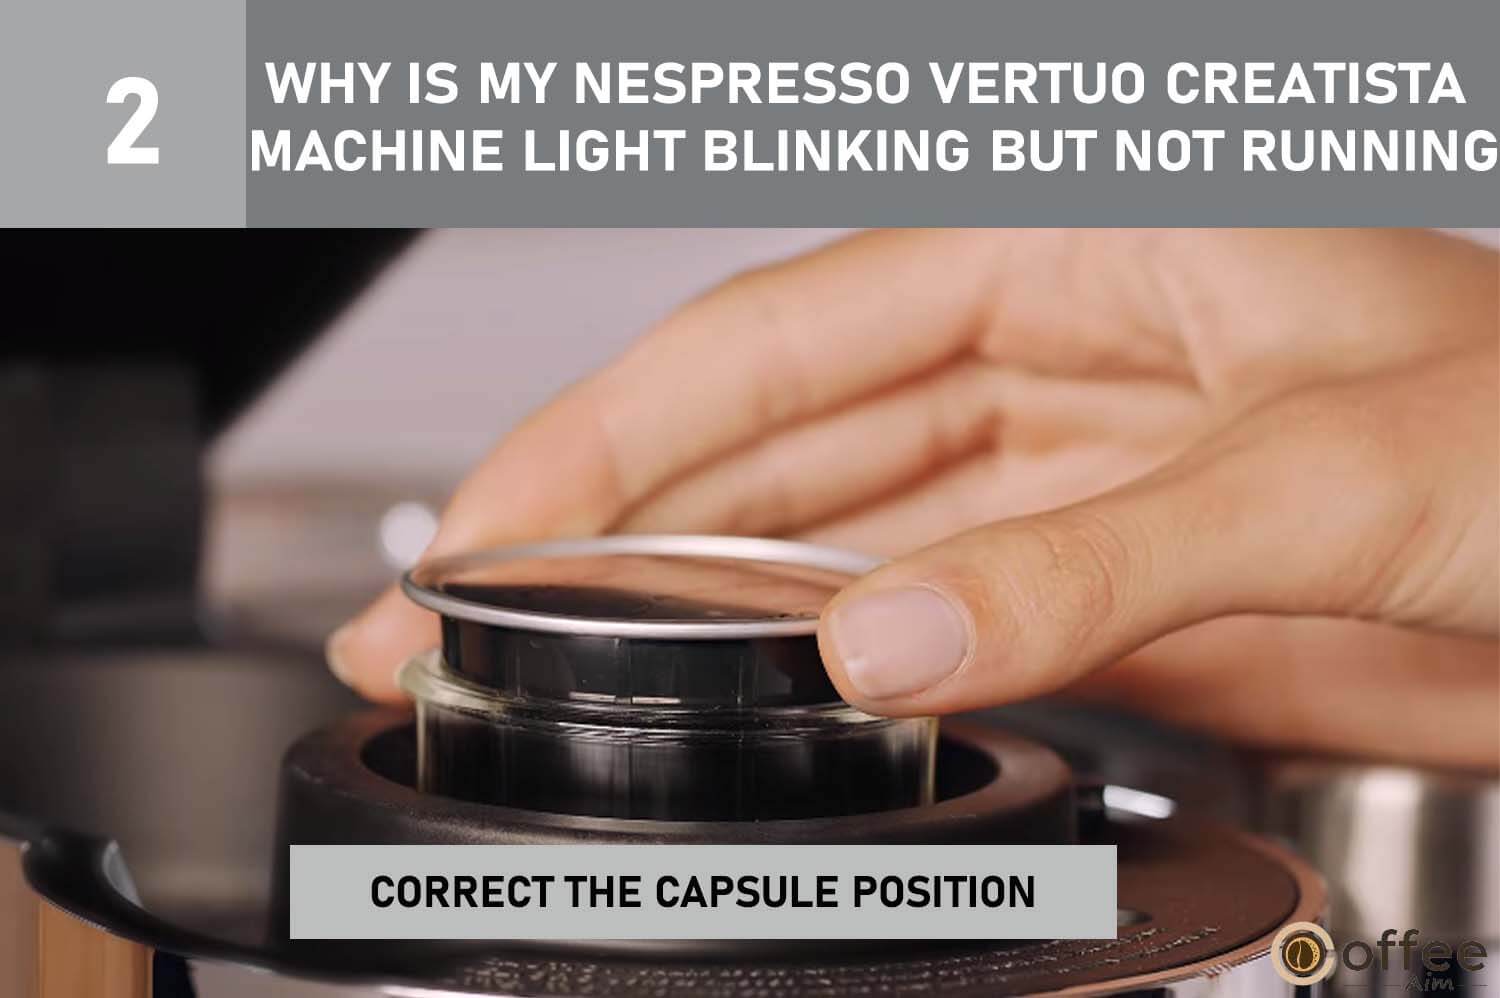 Ensure Nespresso Vertuo Creatista capsule is properly positioned. Follow steps in "Nespresso Vertuo Creatista Not Working" article for troubleshooting.